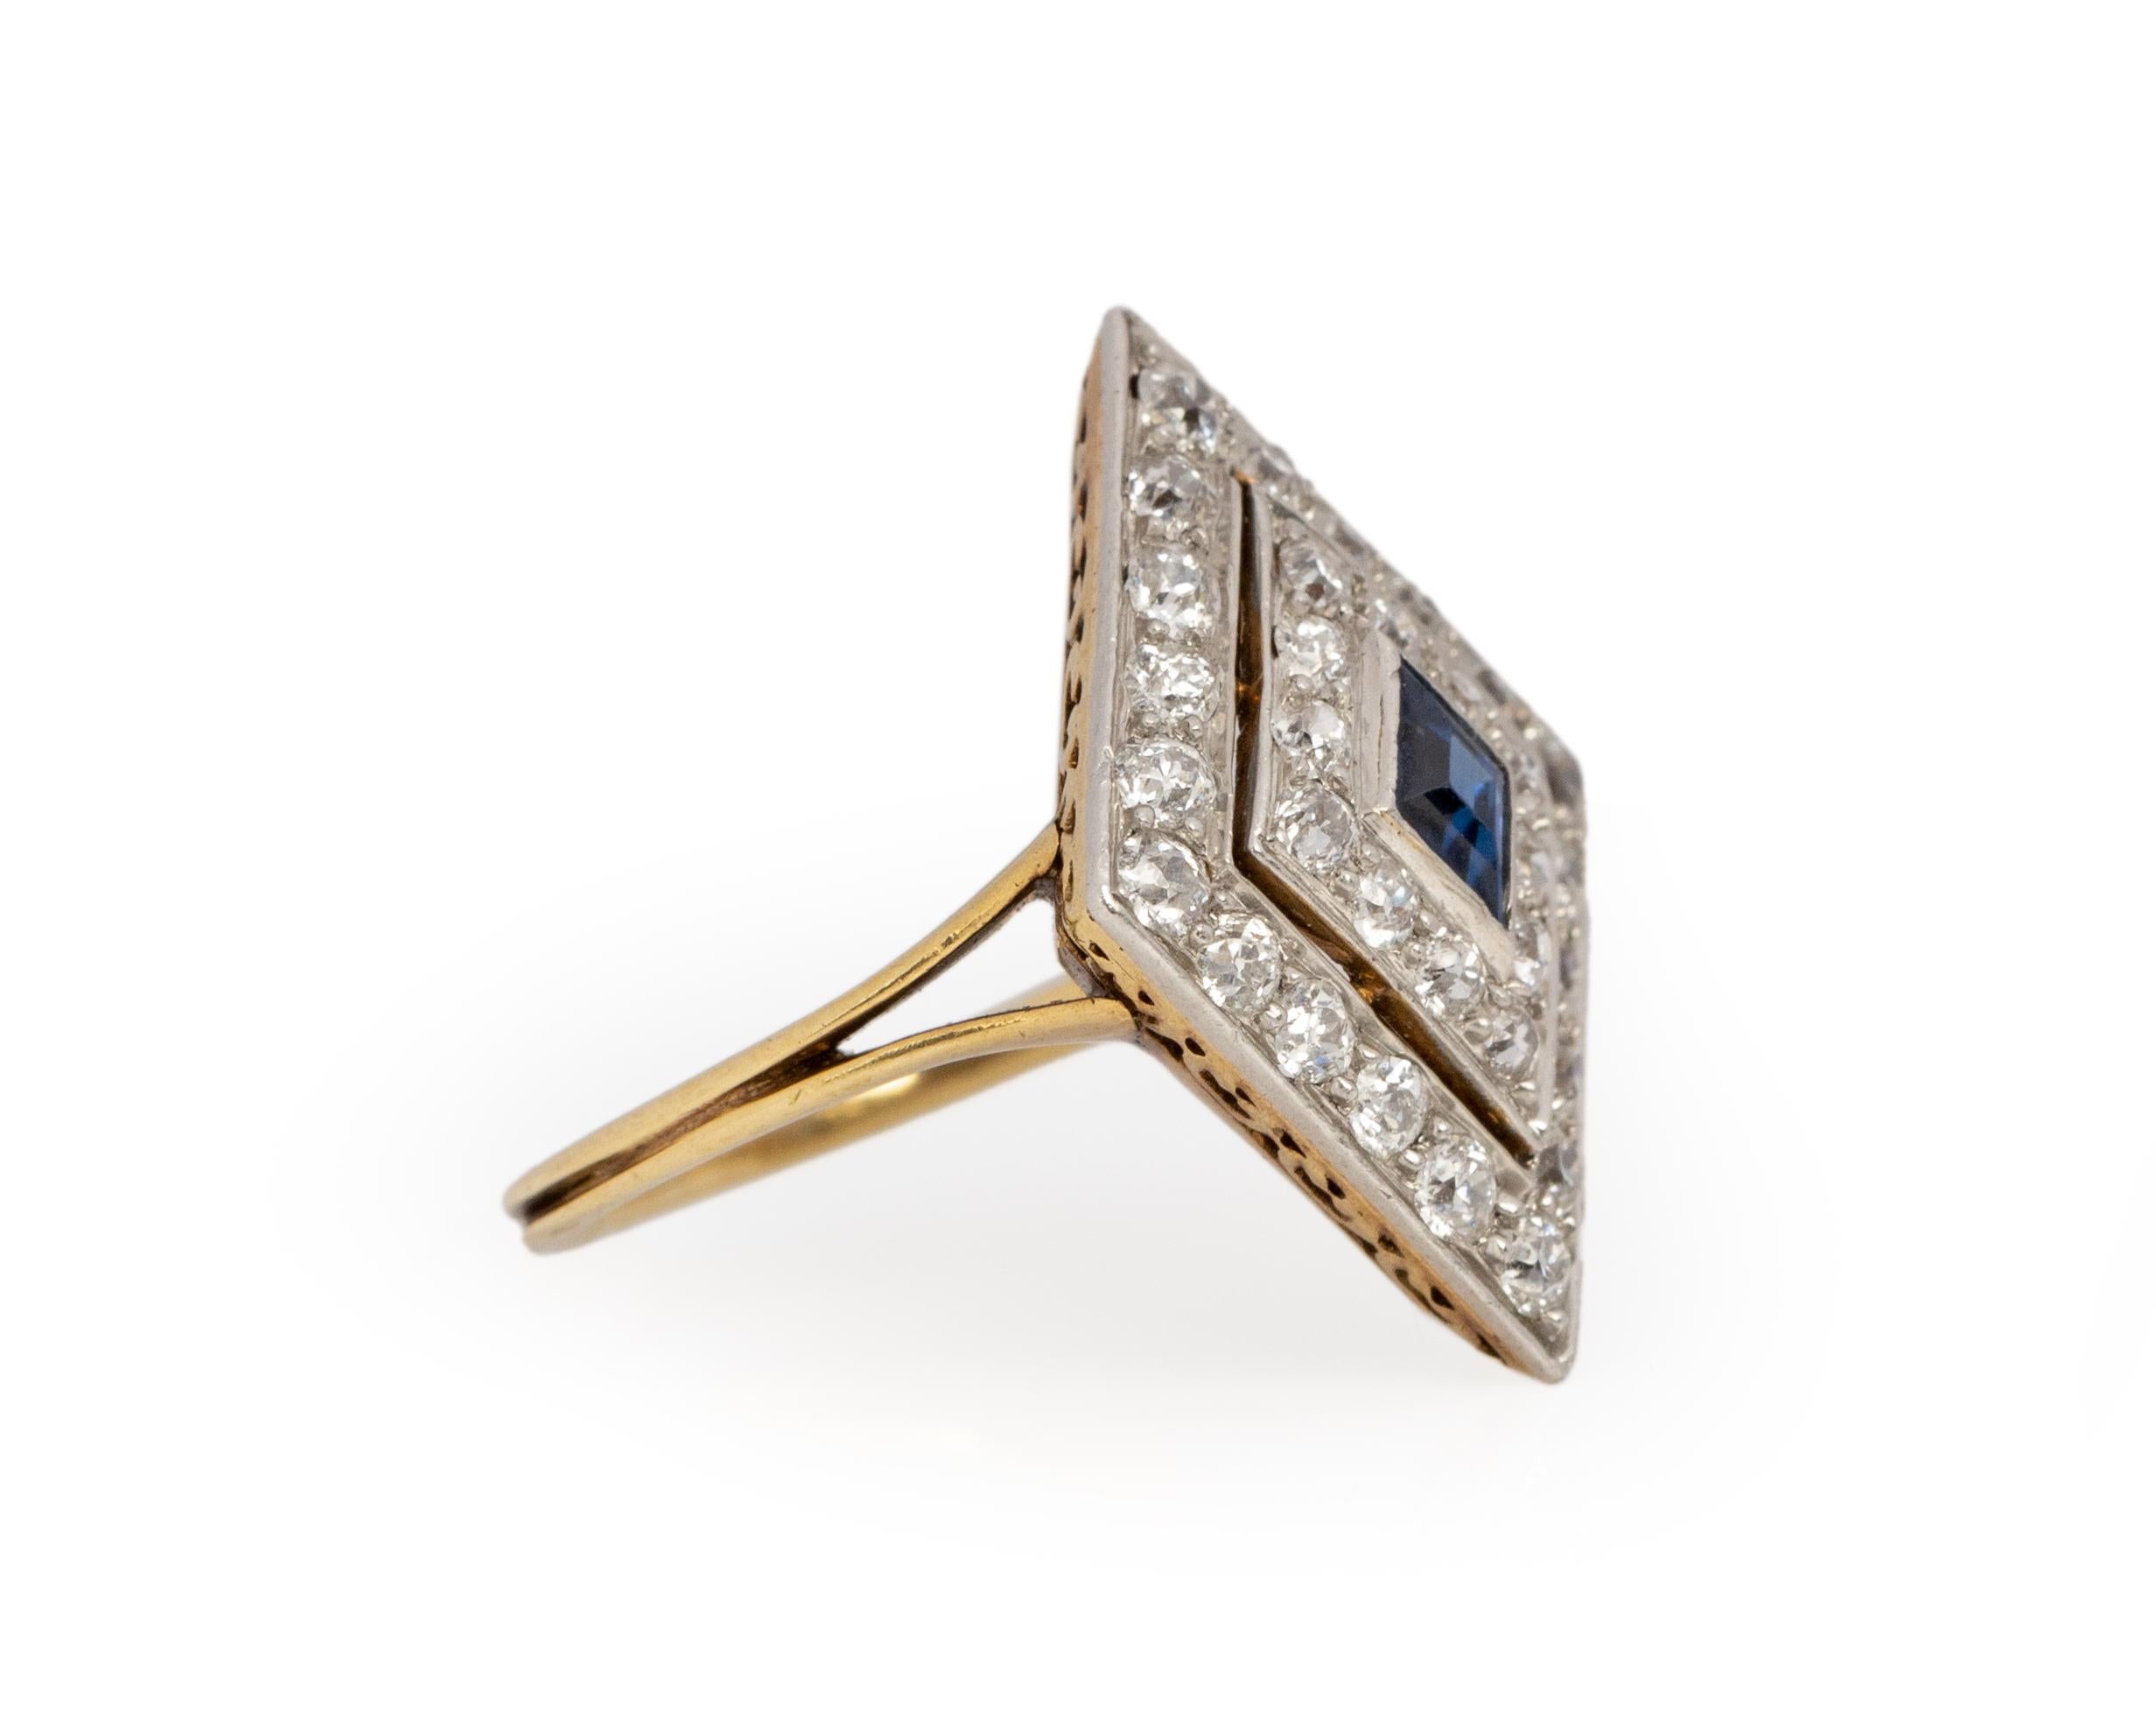 Ring Size: 4.5
Metal Type: 18karat Yellow Gold & Platinum [Hallmarked, and Tested]
Weight: 3.0 grams

Diamond Details:
Weight: .80carat
Cut: Old European brilliant
Color: F-G
Clarity: VS

Color Stone Details:
Type: Sapphire
Weight: .40carat
Cut: